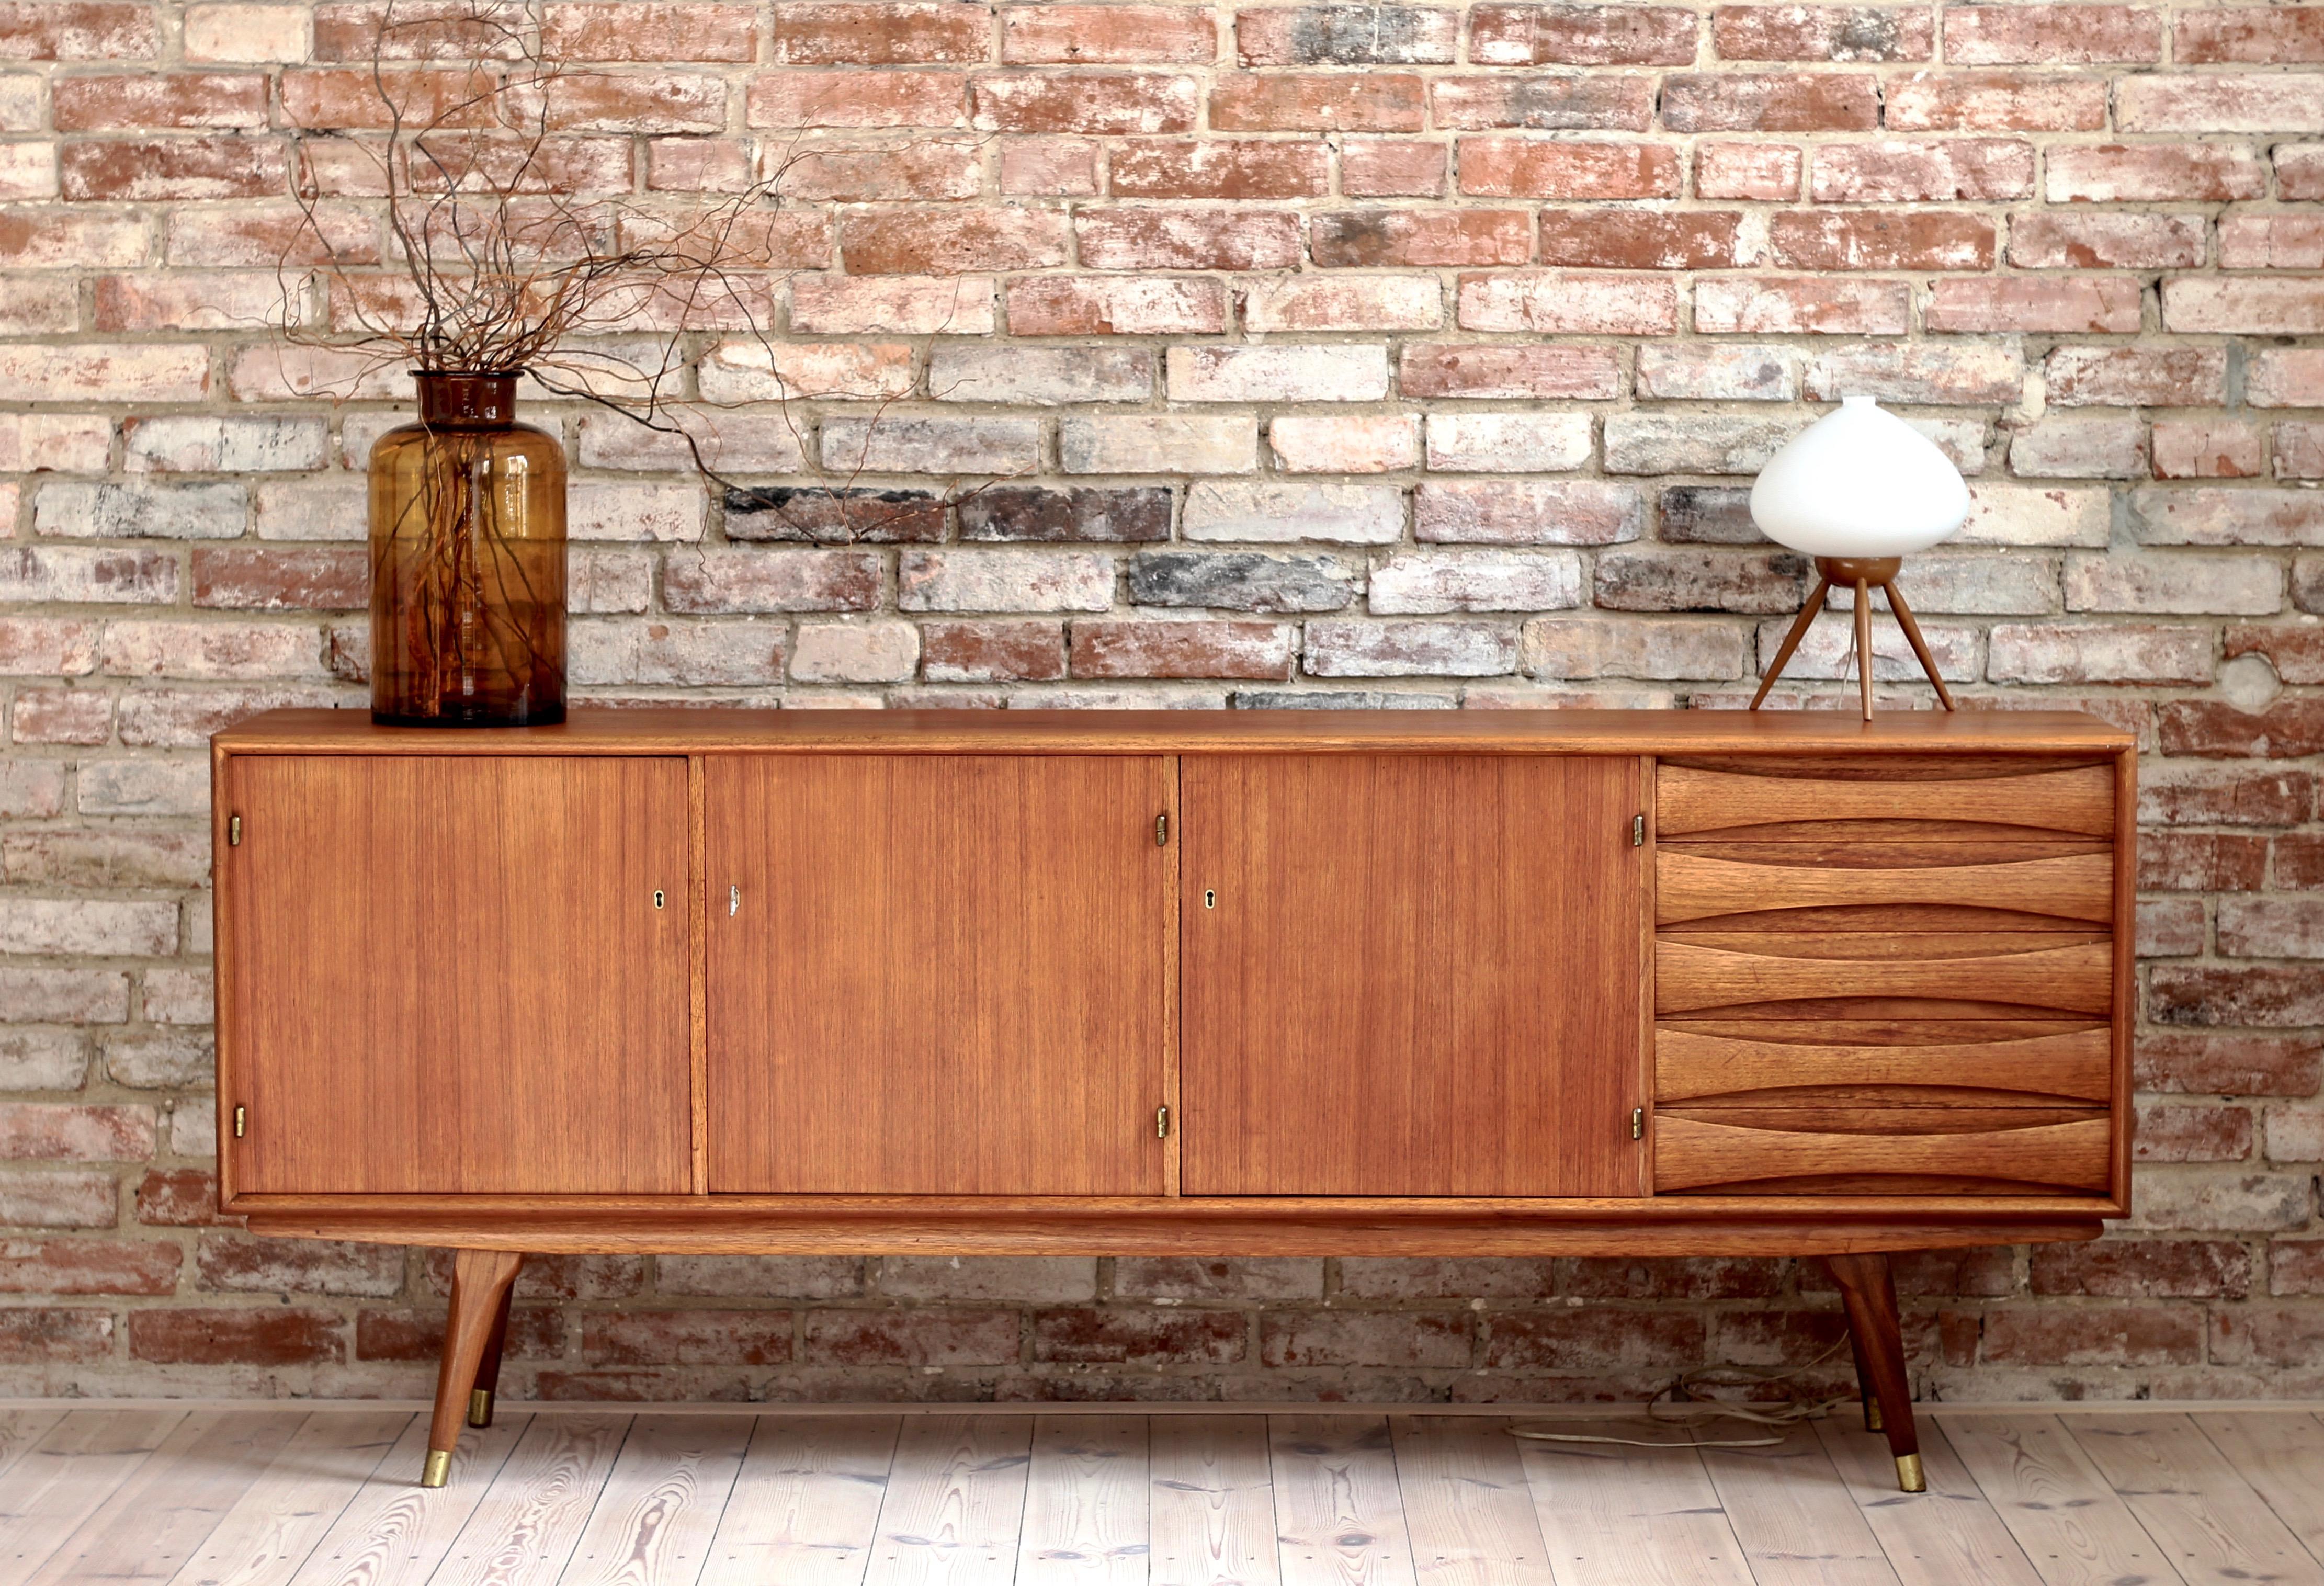 This is a quite rare Sven Andersen teak sideboard designed and manufactured in Norway around second half of 1950s. The piece features three doors that reveal lots of storage space and five drawers in the section on the right. The sideboard features